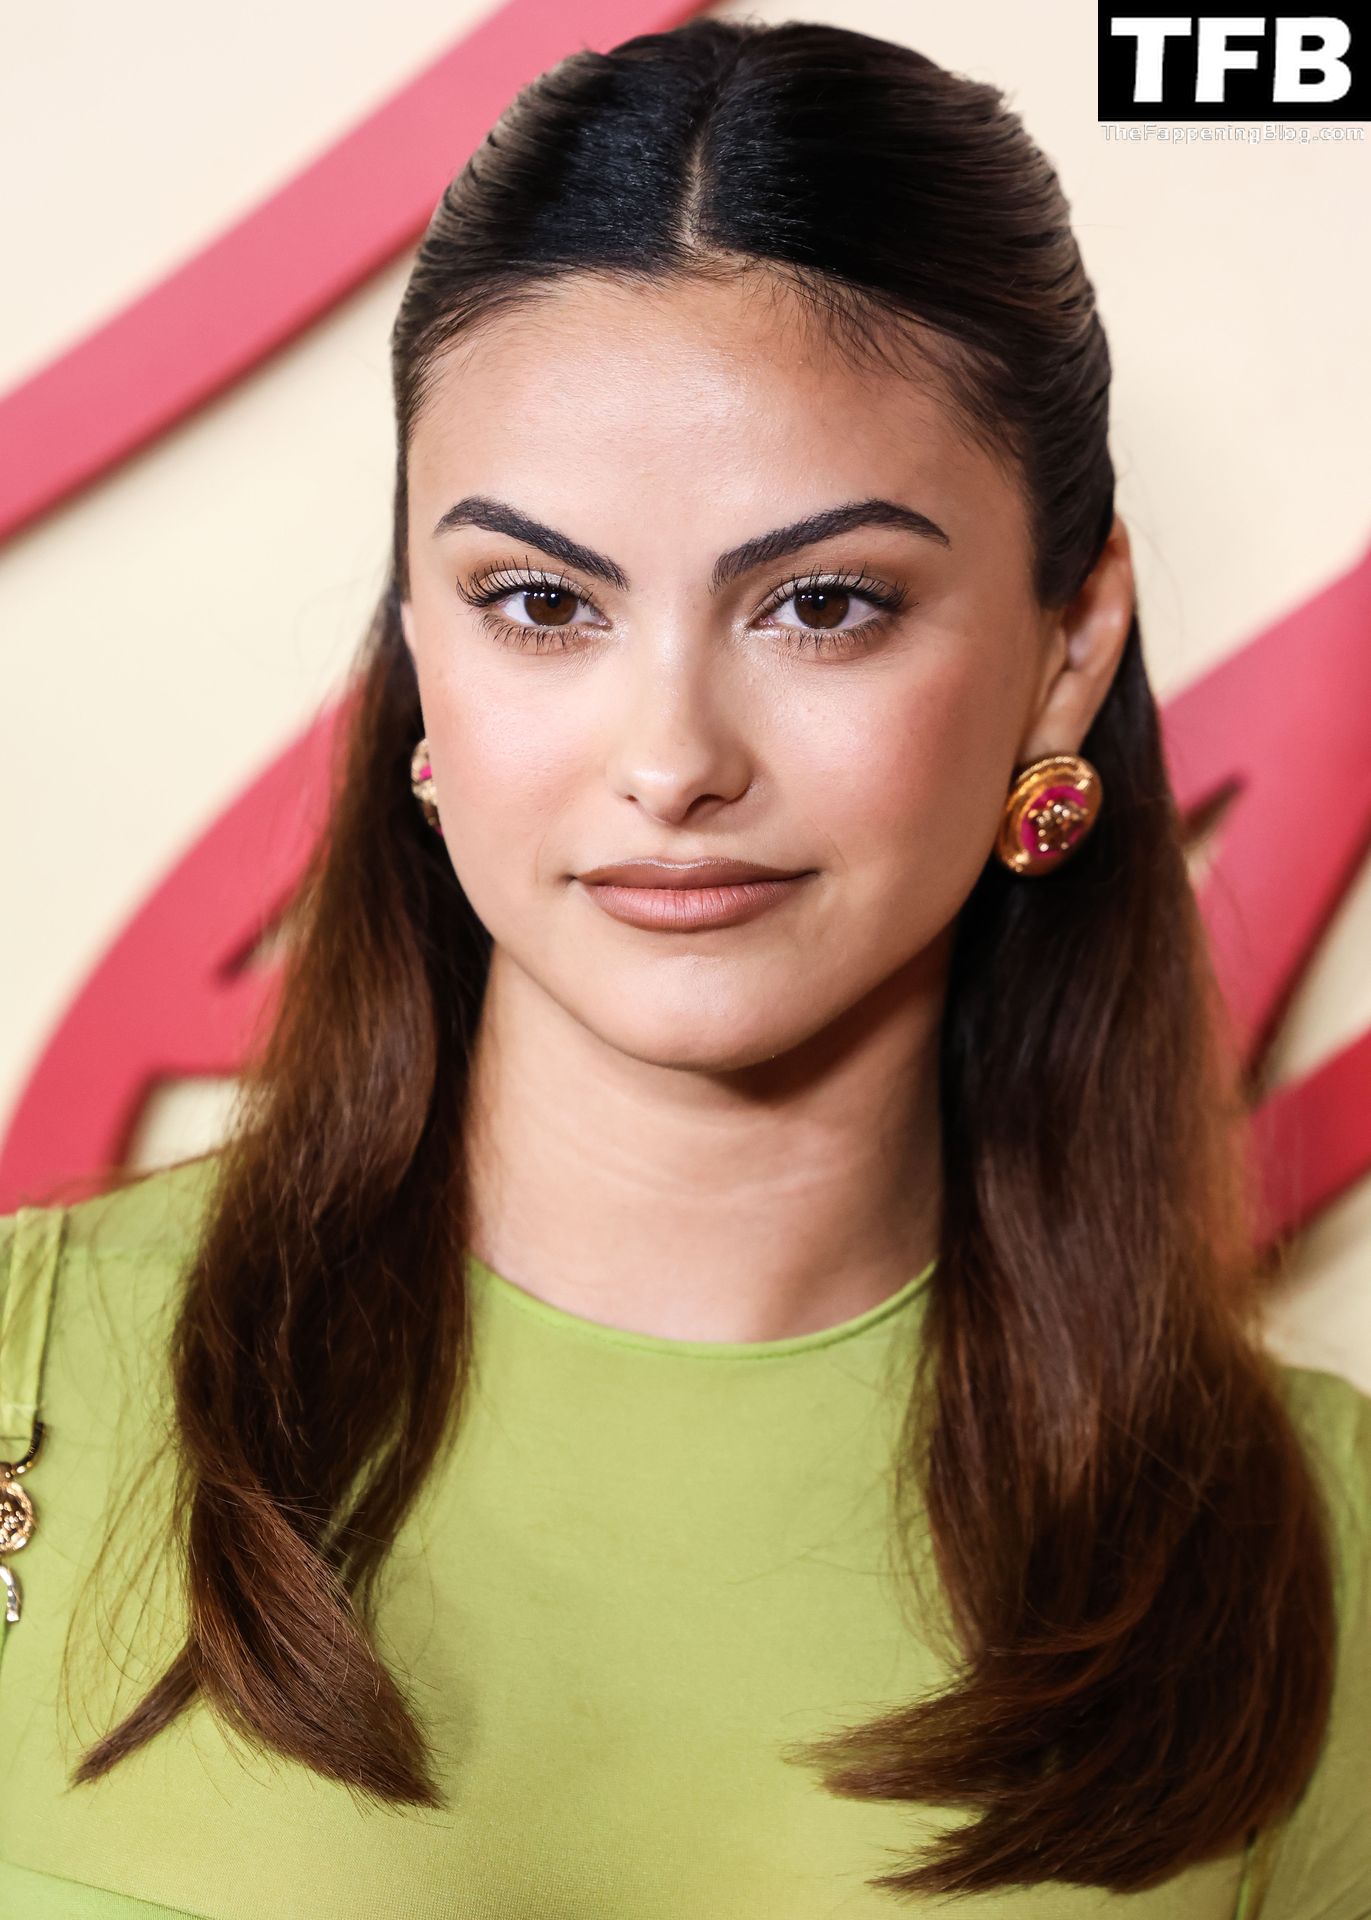 Camila-Mendes-Sexy-The-Fappening-Blog-6-1.jpg